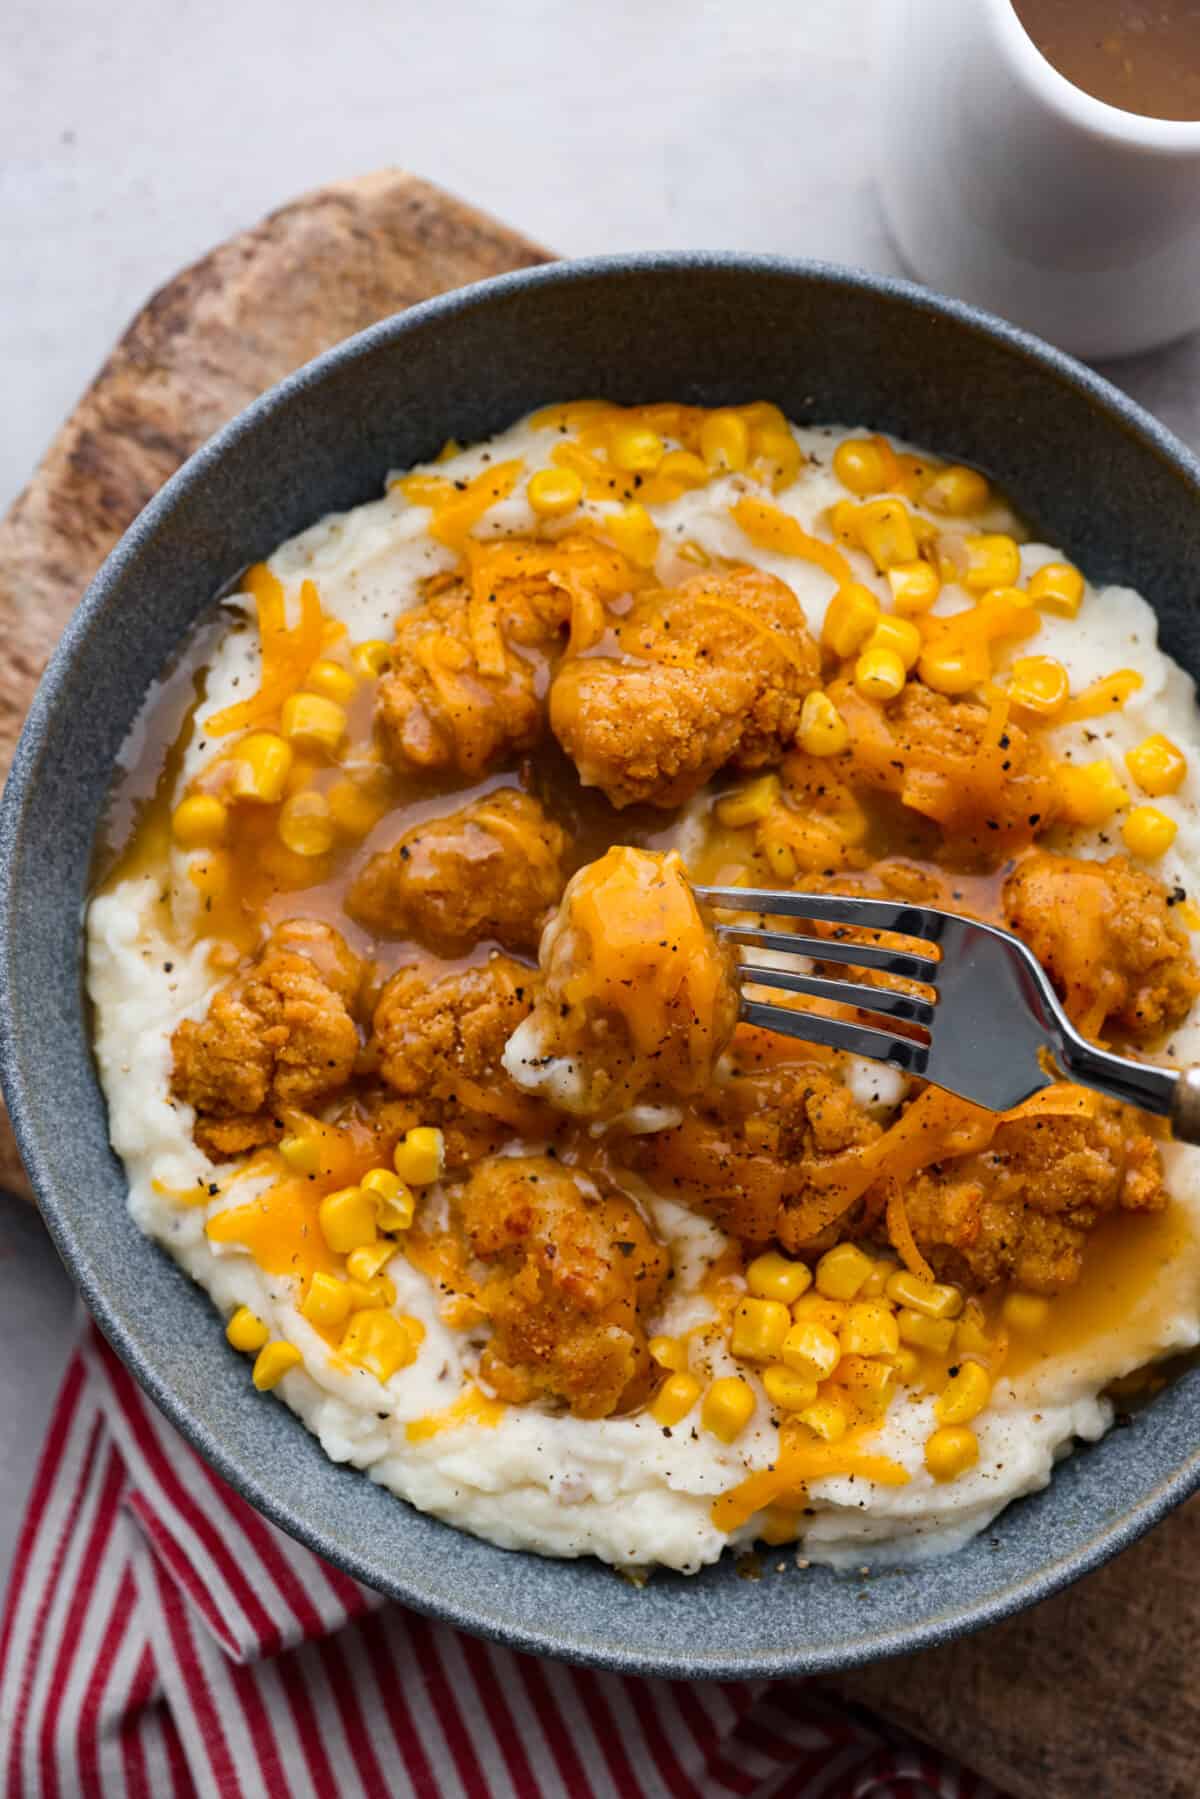 Crispy chicken, mashed potatoes and gravy and corn served in a gray bowl.